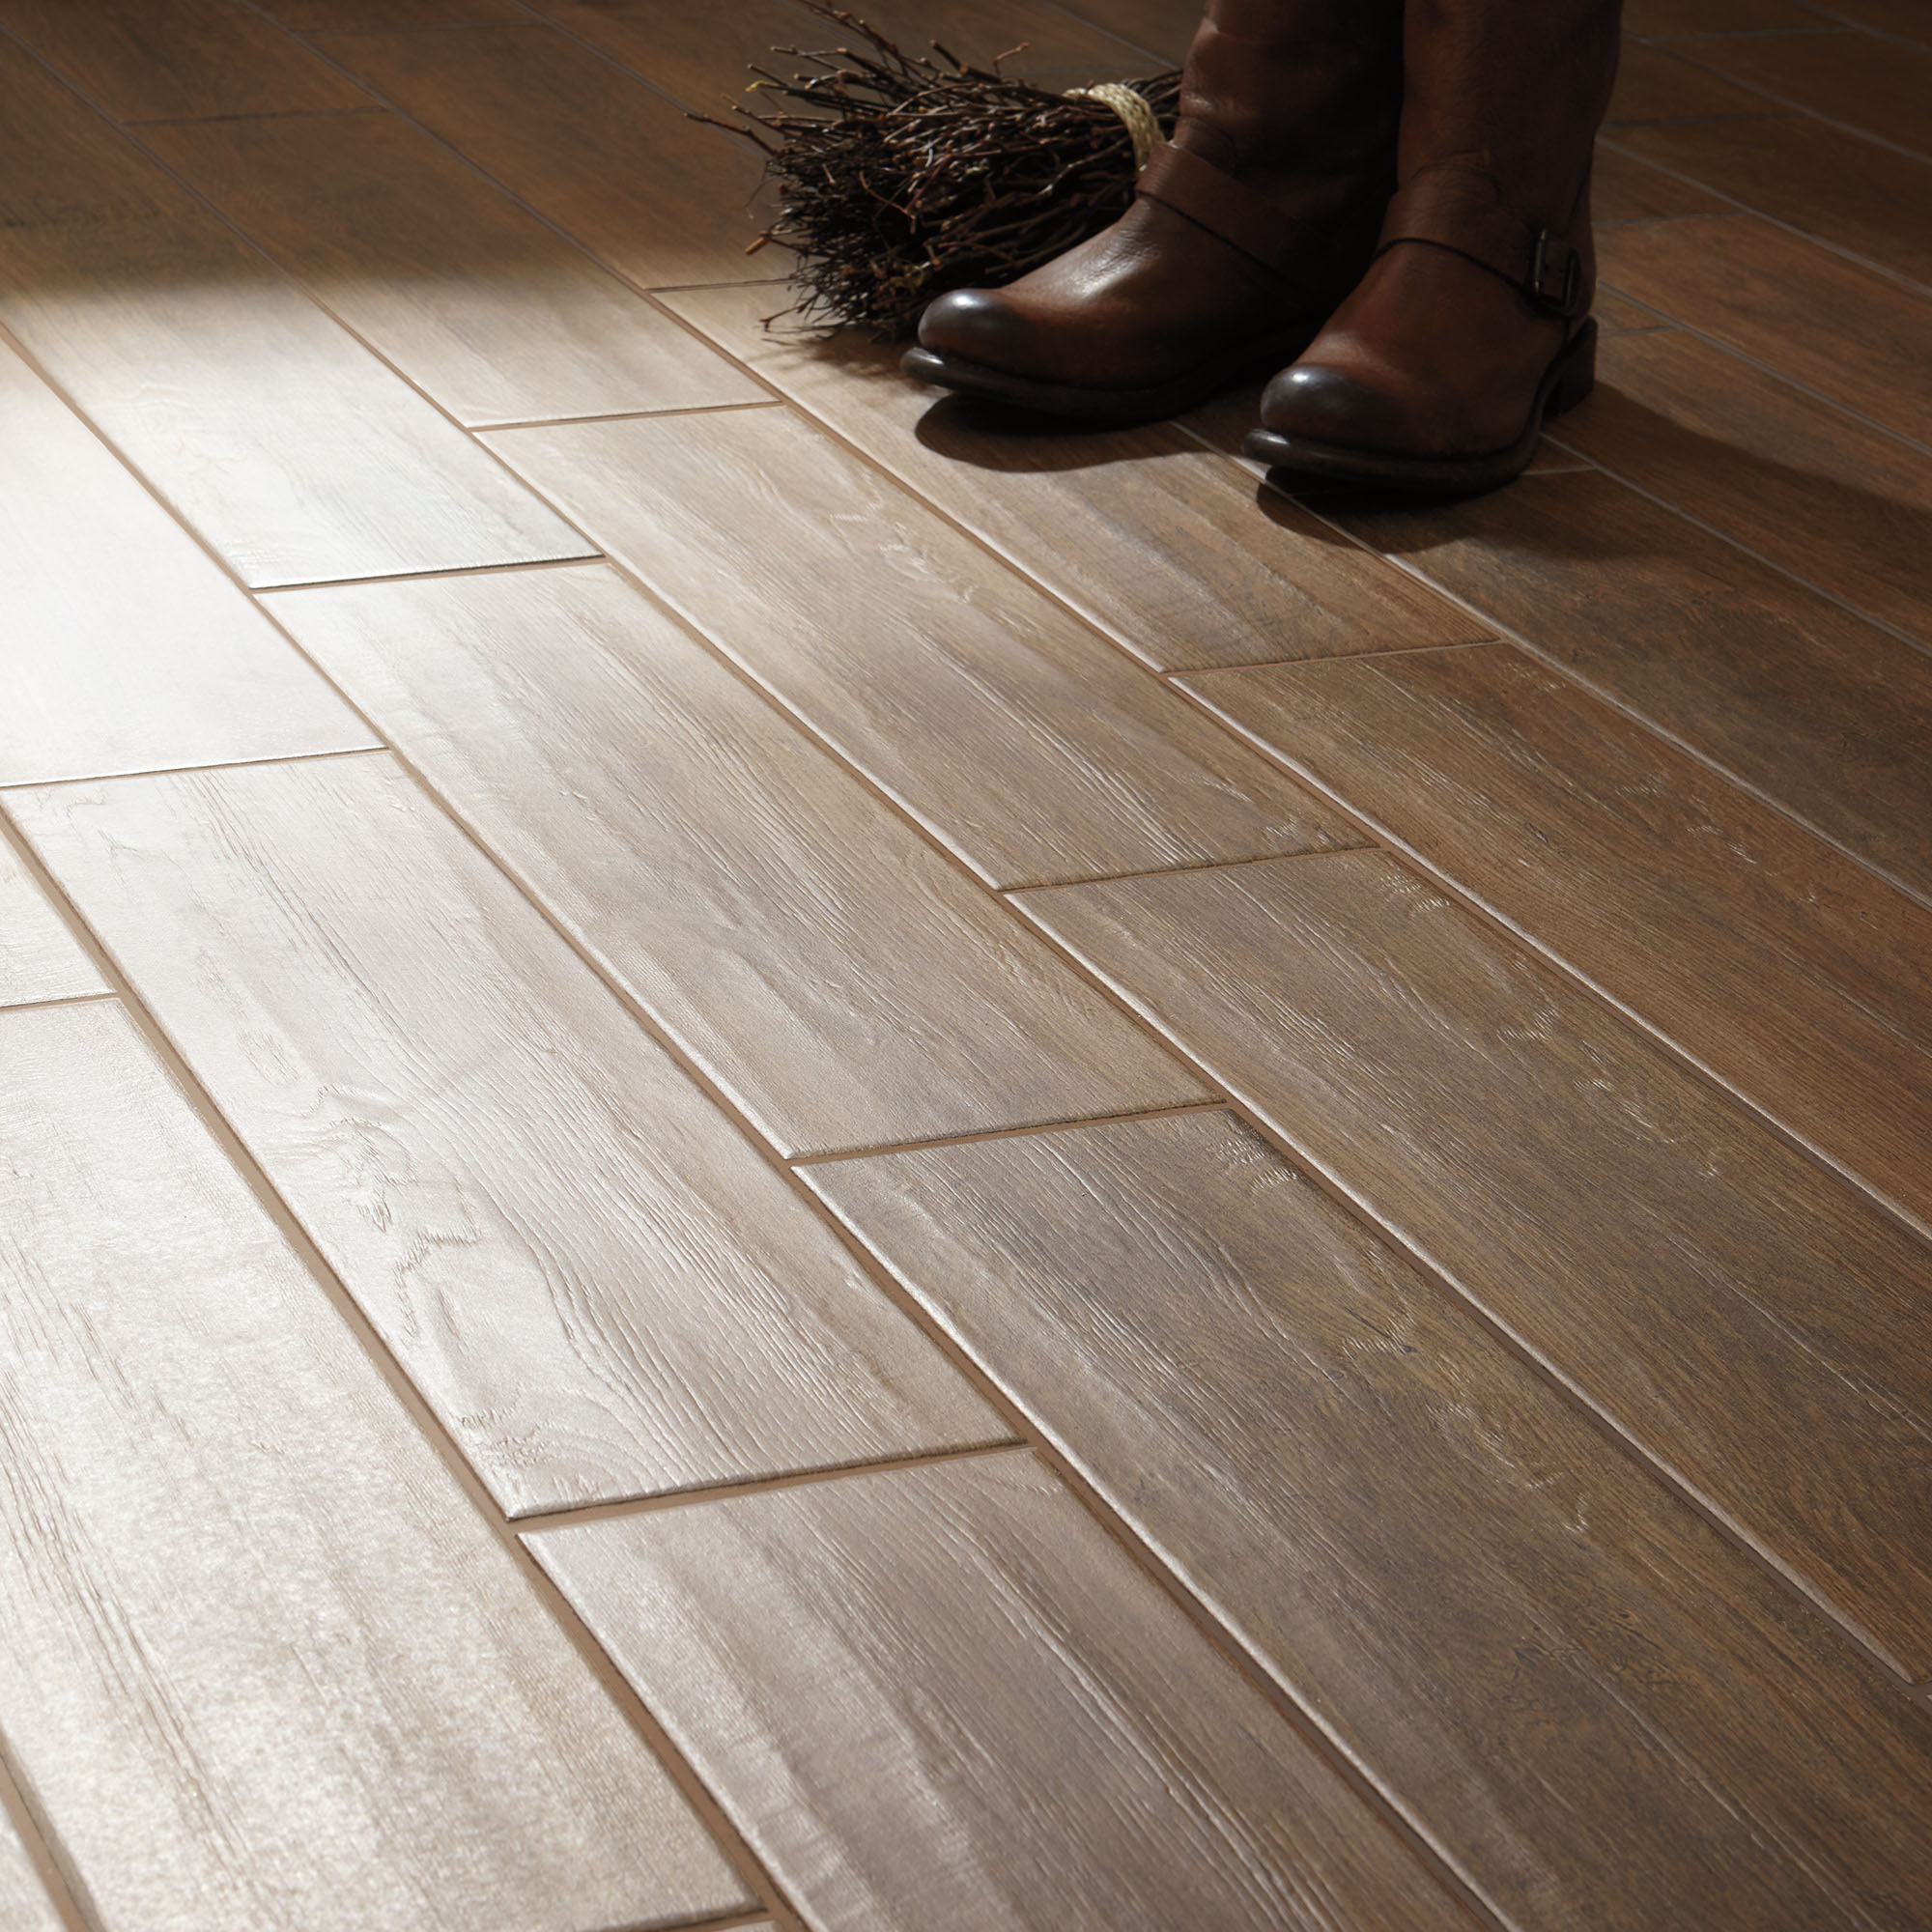 Willow Bend Field Tile Click 6x24 Matte in Willow Bend White Wb01 6 X 36 - Tile by Daltile